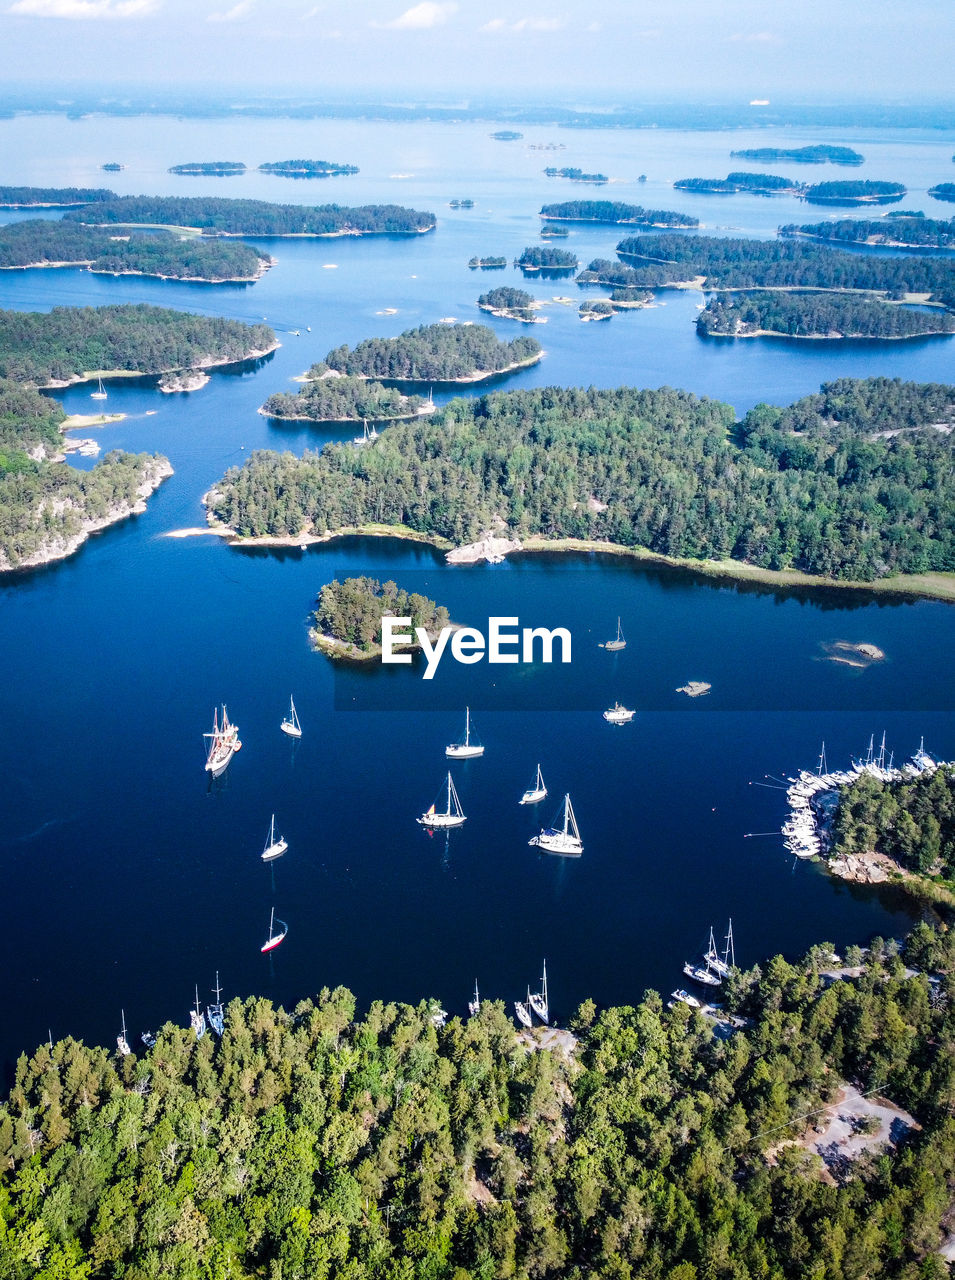 High angle view of boats in sea in stockholm archipelago